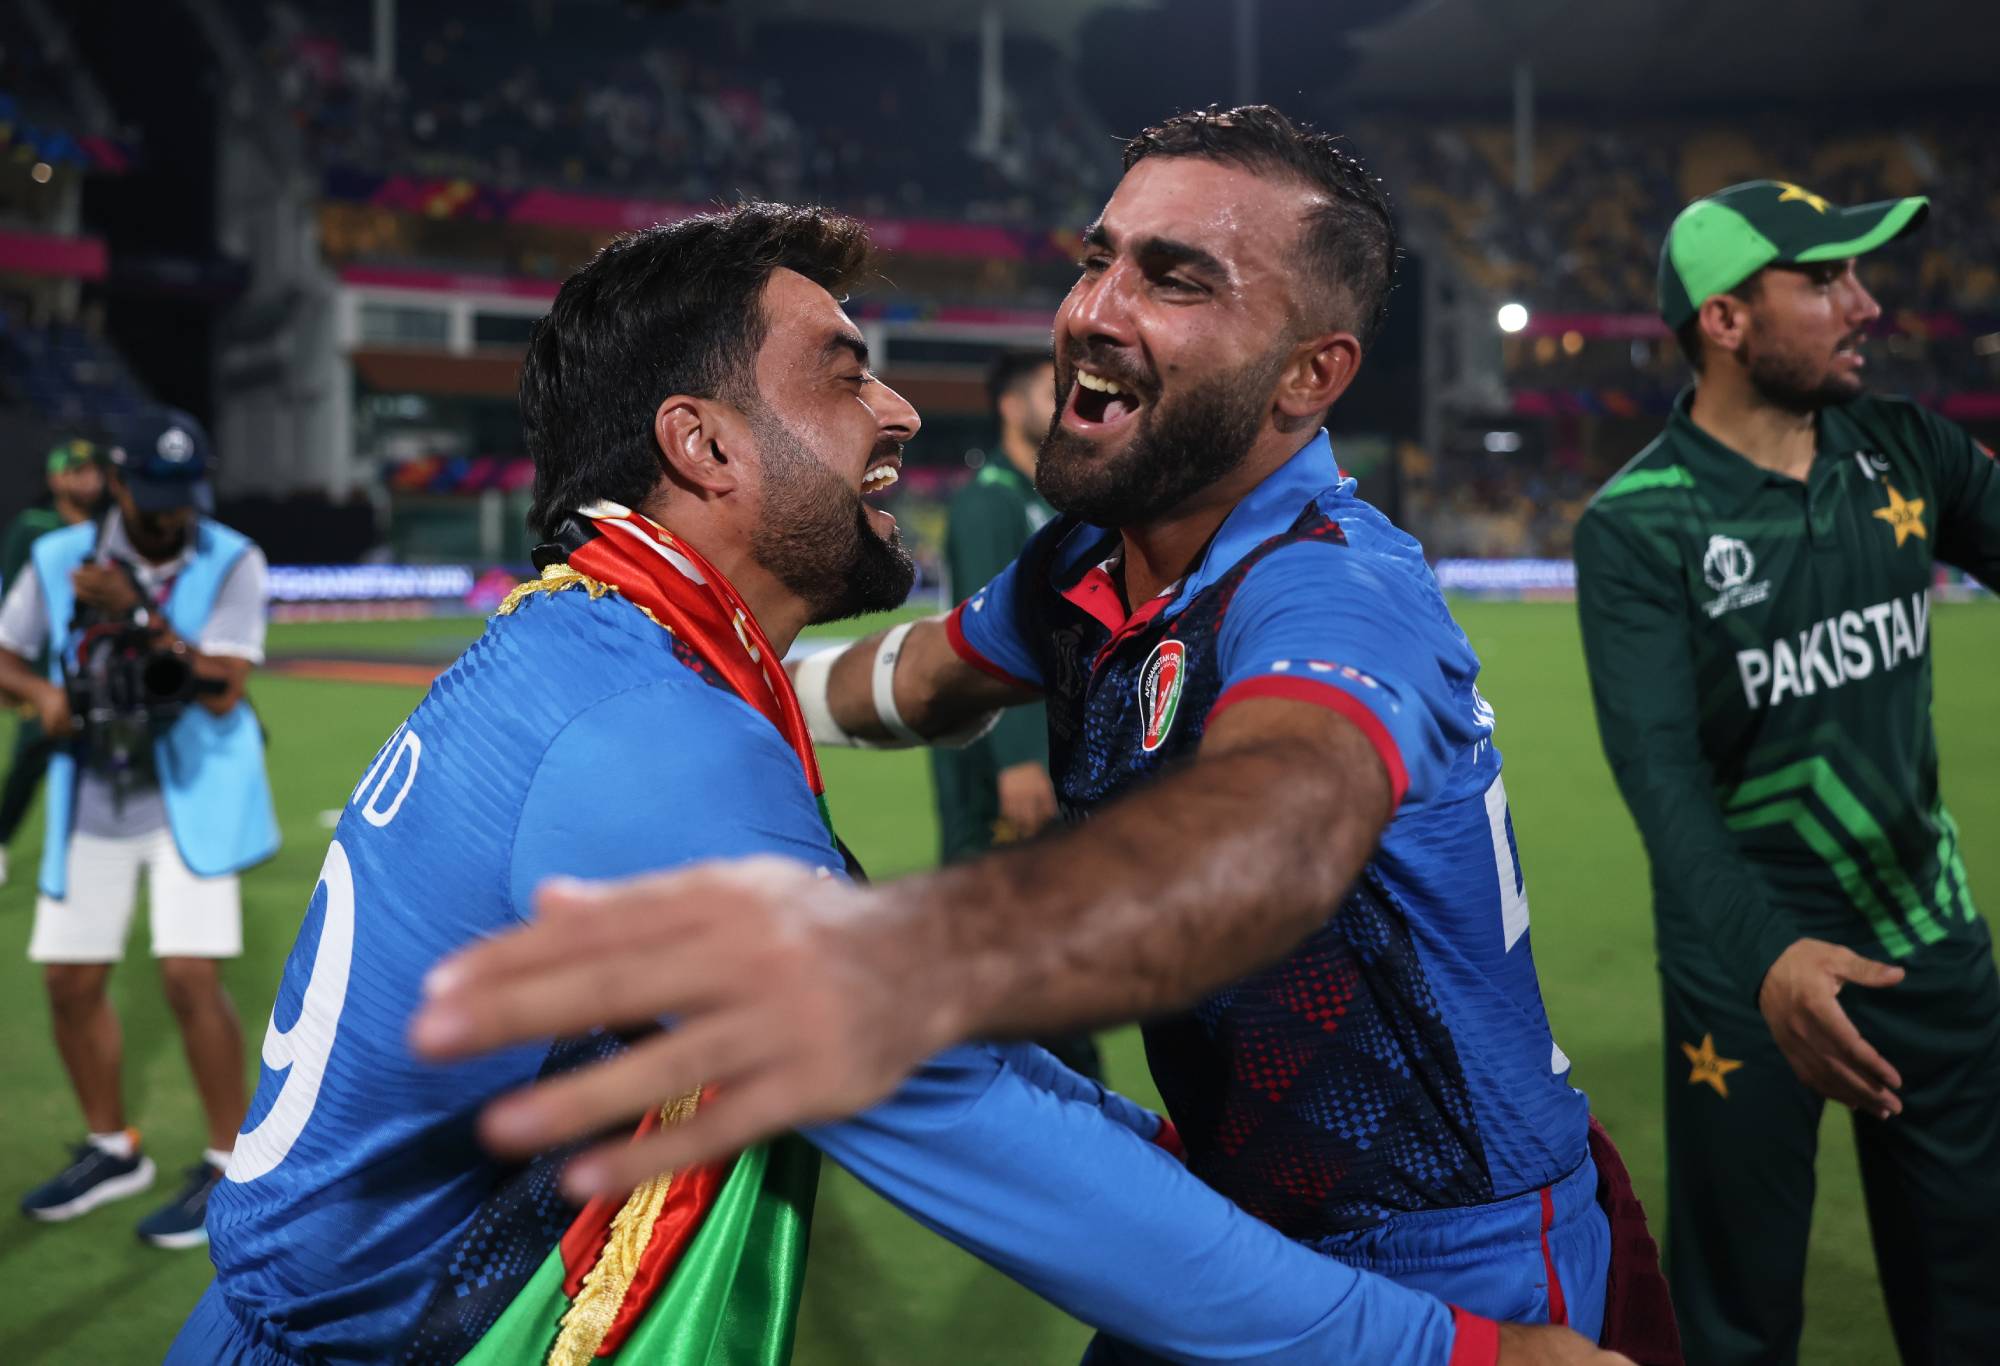 CHENNAI, INDIA - OCTOBER 23: Rashid Khan and Hashmatullah Shahidi of Afghanistan celebrate after victory by 8 wickets following the ICC Men's Cricket World Cup India 2023 between Pakistan and Afghanistan at MA Chidambaram Stadium on October 23, 2023 in Chennai, India. (Photo by Matthew Lewis-ICC/ICC via Getty Images)